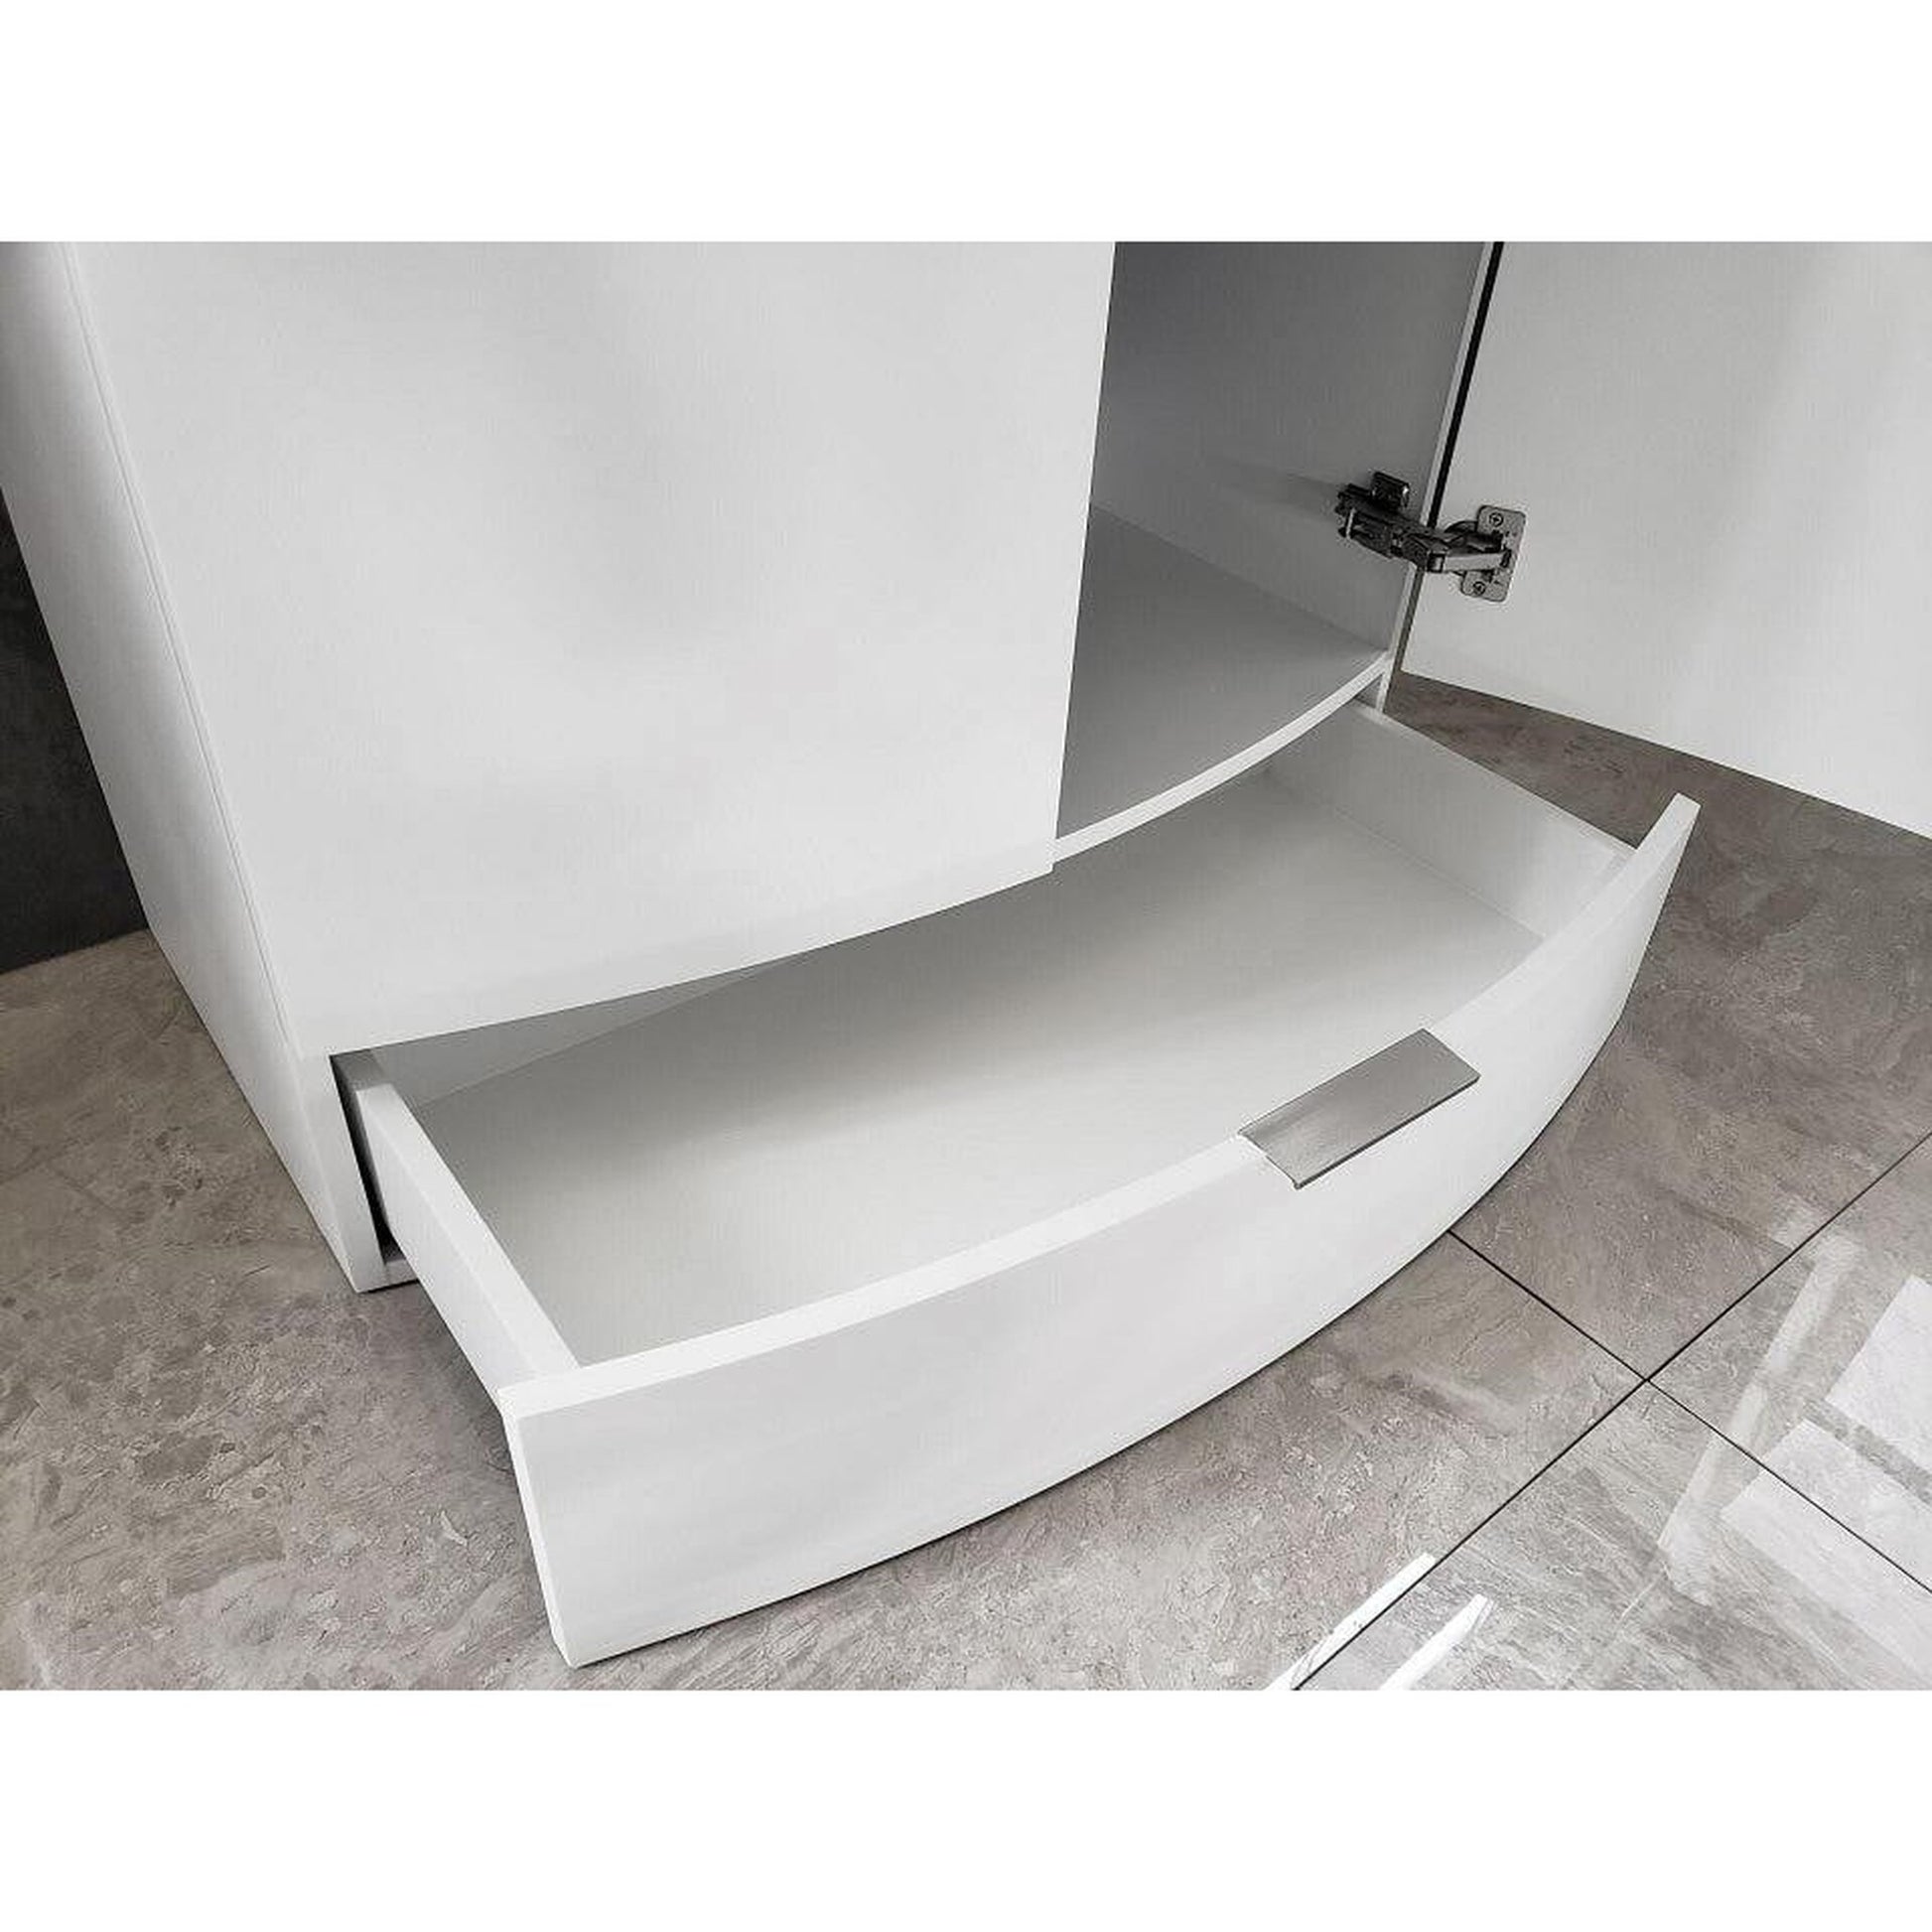 Legion Furniture WTM8130 30" White Freestanding PVC Vanity Cabinet With Tempered Glass Top and Sink